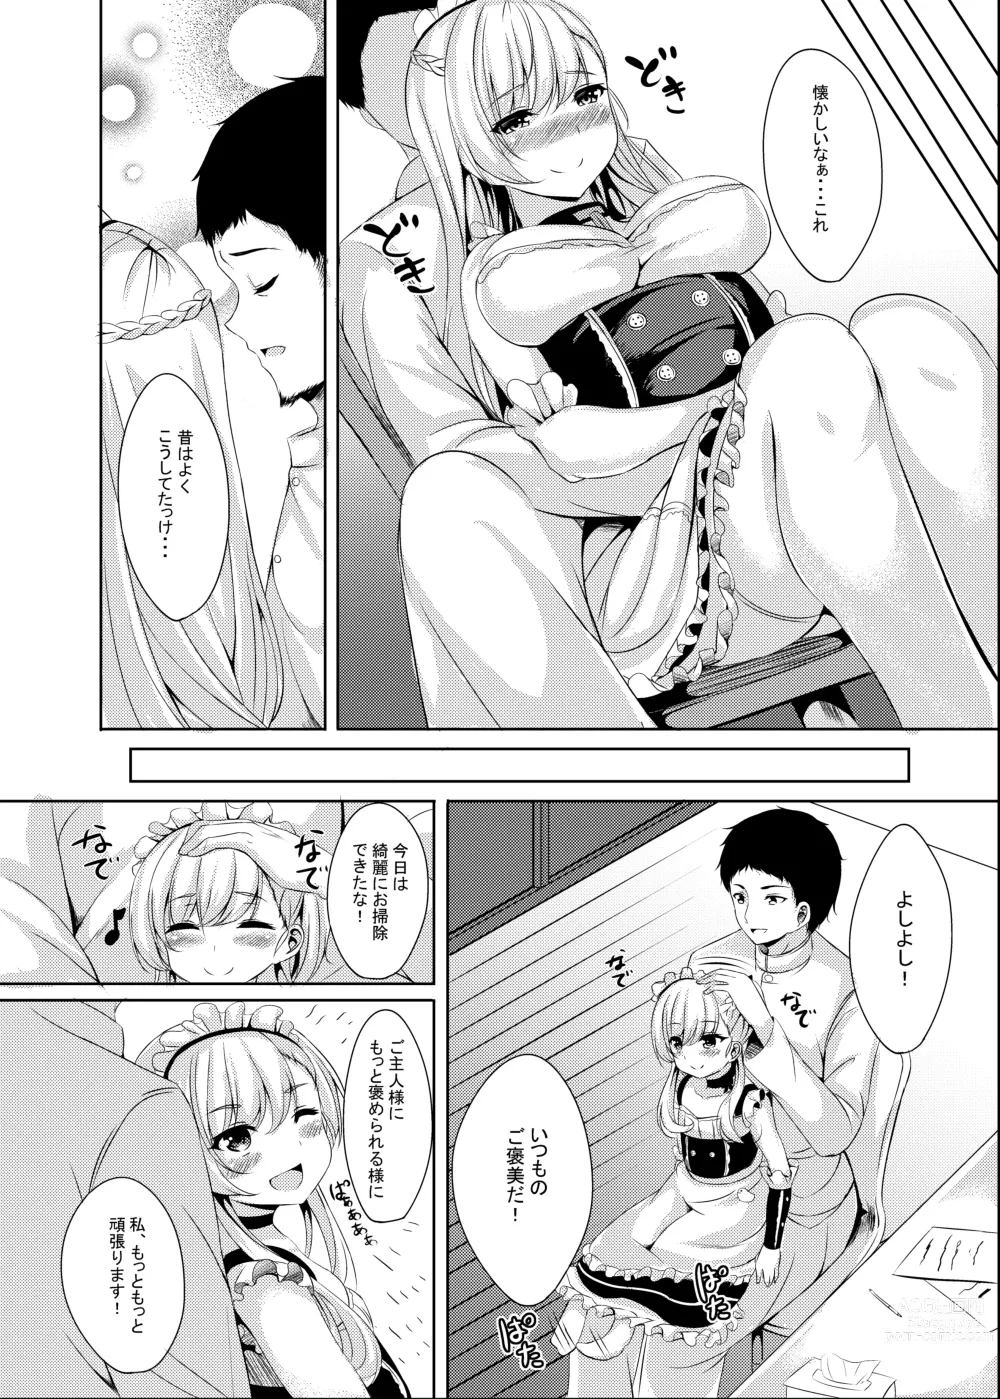 Page 5 of doujinshi ring the bell